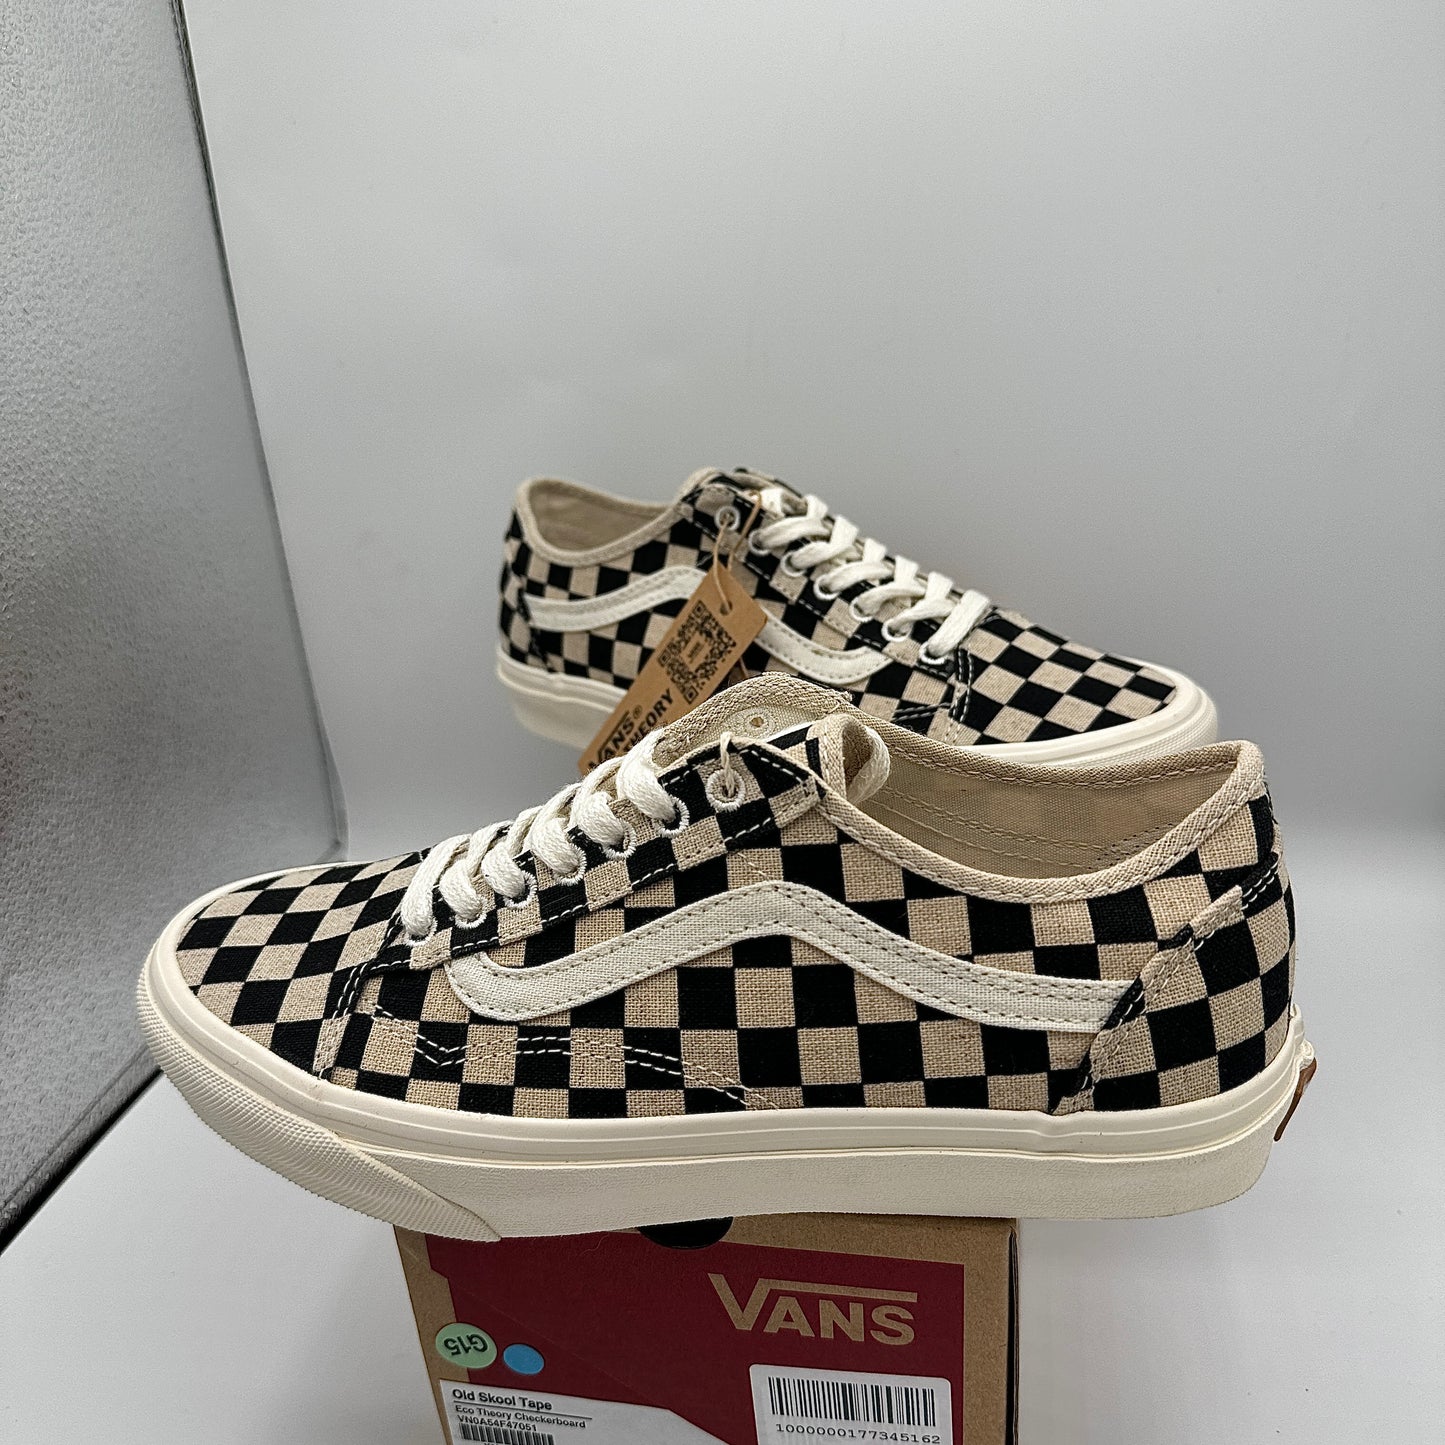 Vans Old Skool Tape Low Sneakers Eco Theory Checkerboard Sustainable Shoes